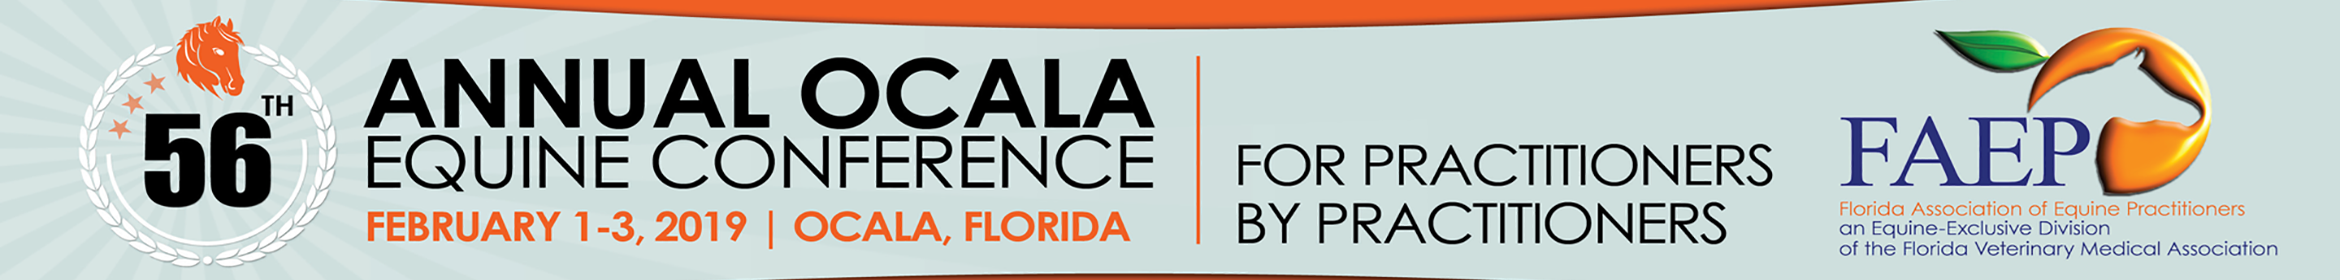 56th Annual FAEP Ocala Equine Conference 2019 Main banner